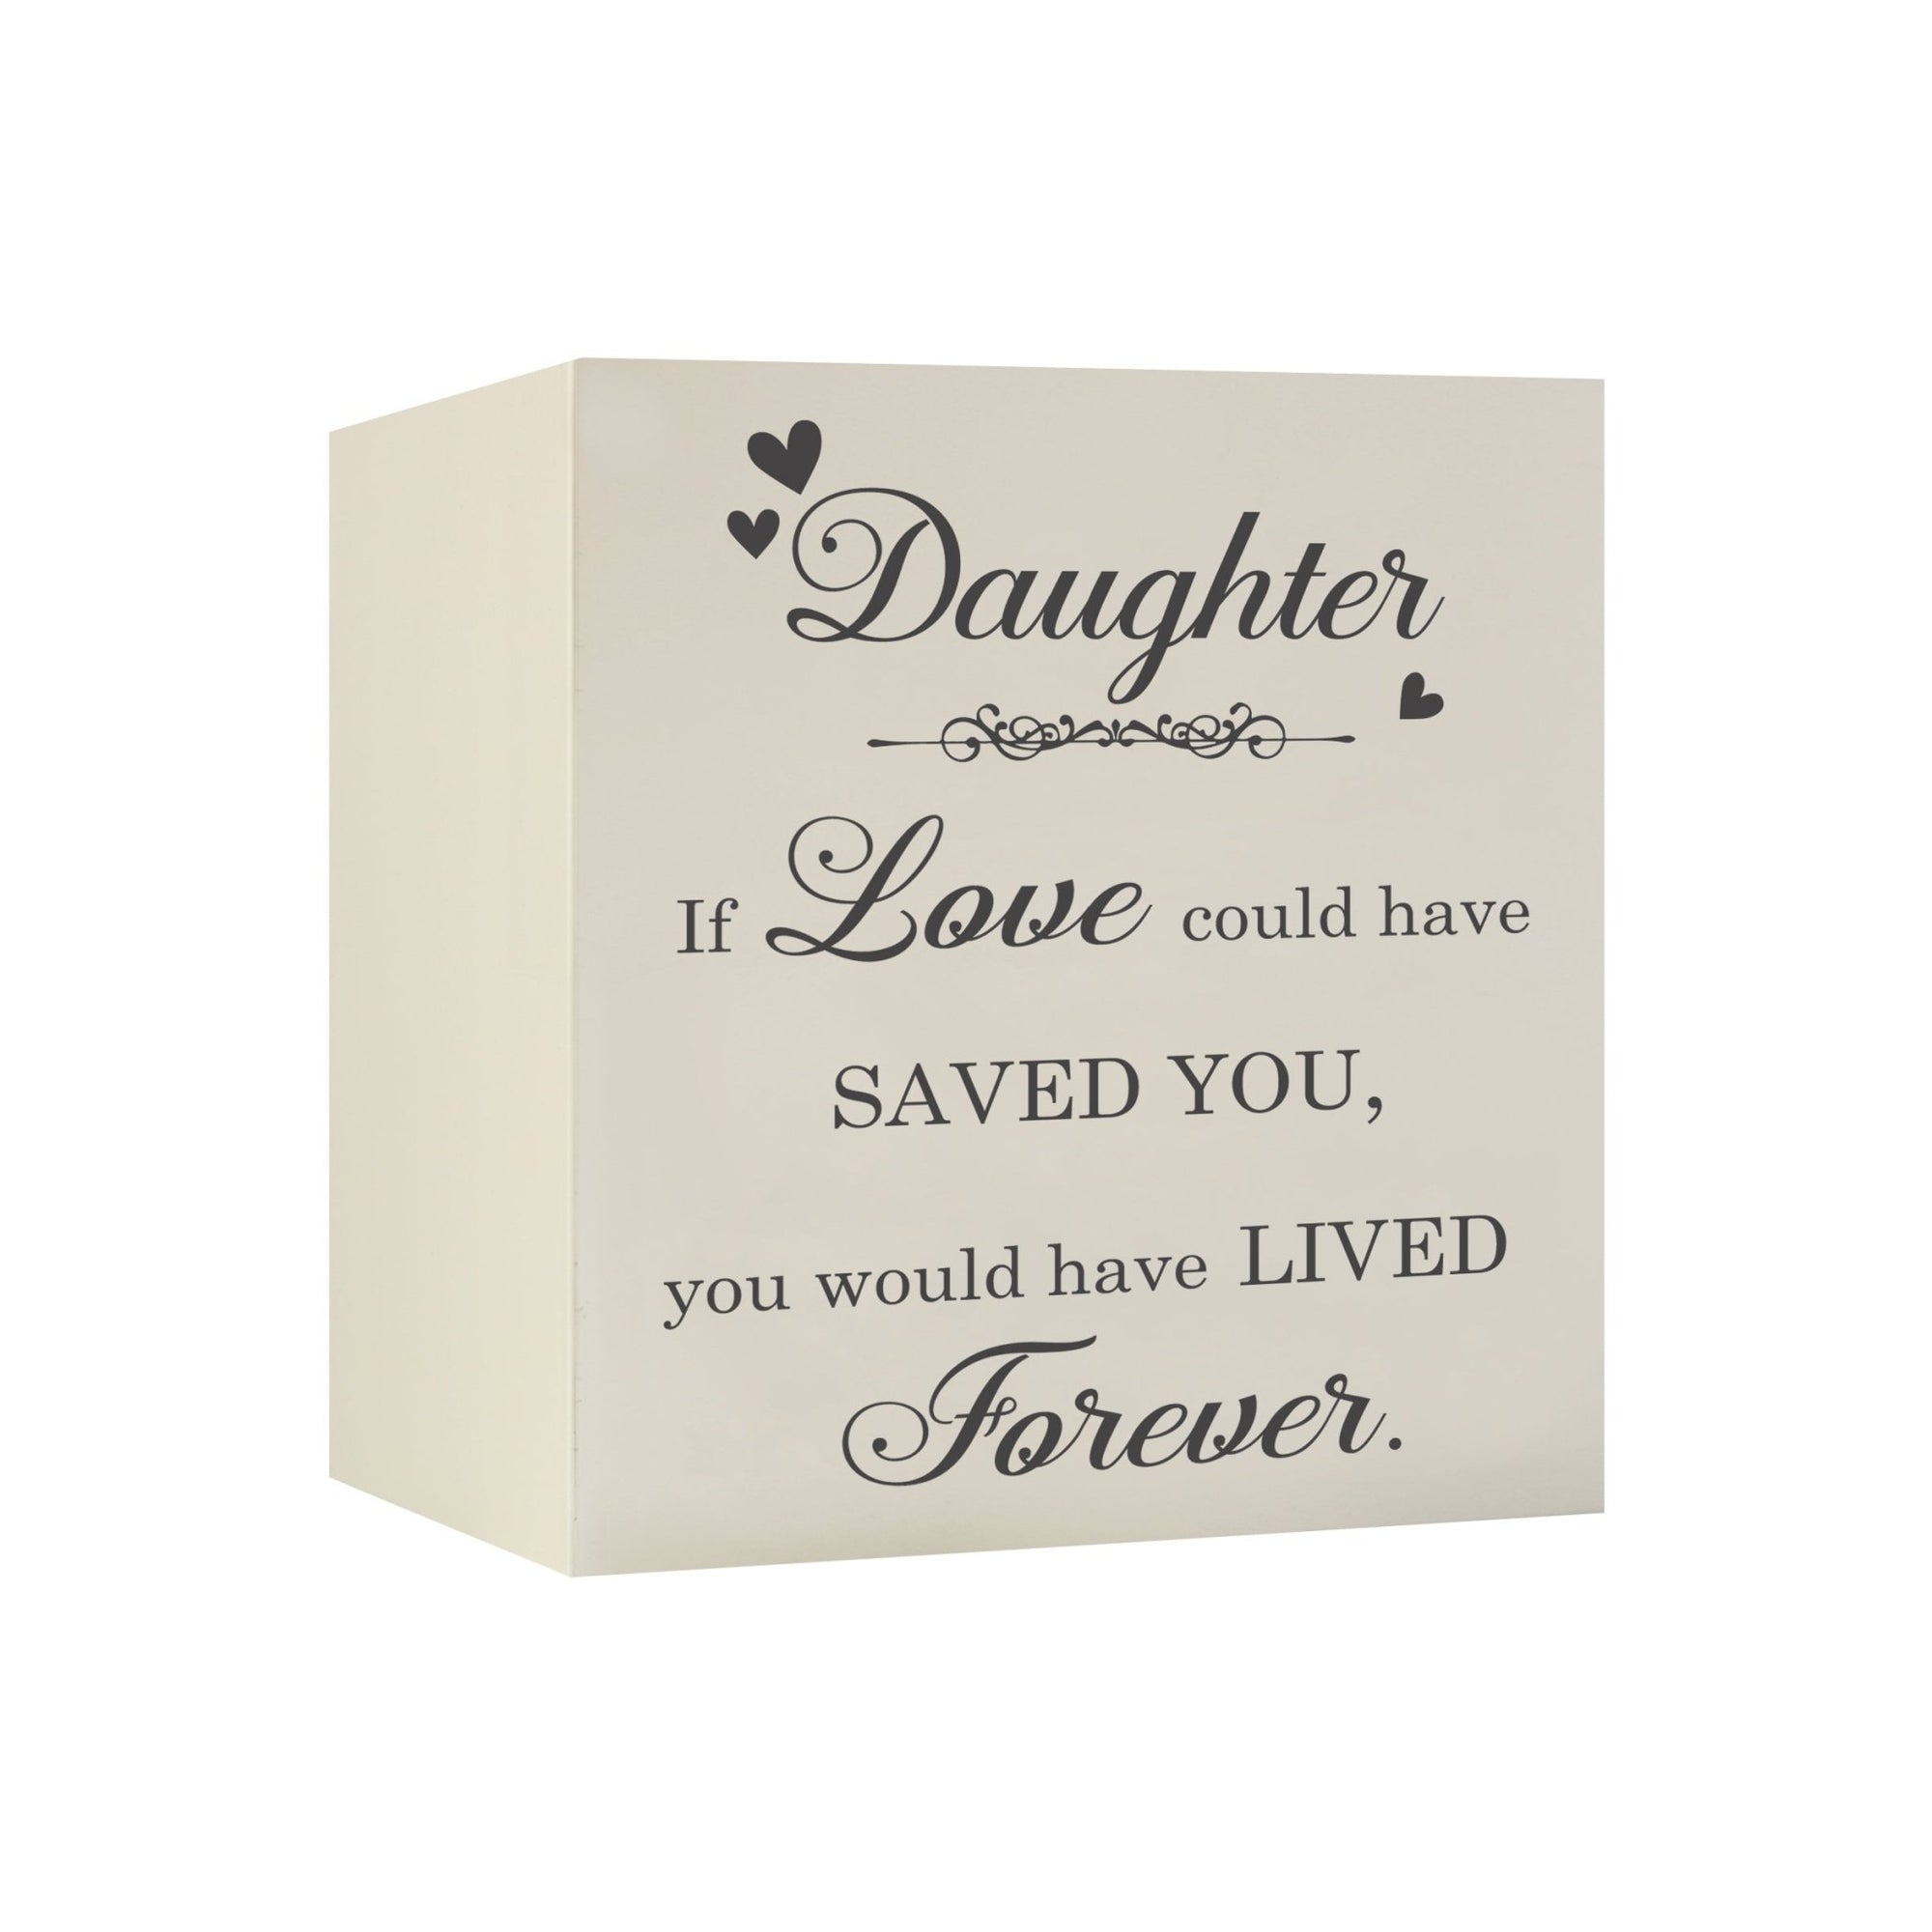 Memorial Bereavement Keepsake Cremation Shadow Box and Urn 6x6in Holds 53 Cu Inches Of Human Ashes Daughter, If Love Could - LifeSong Milestones